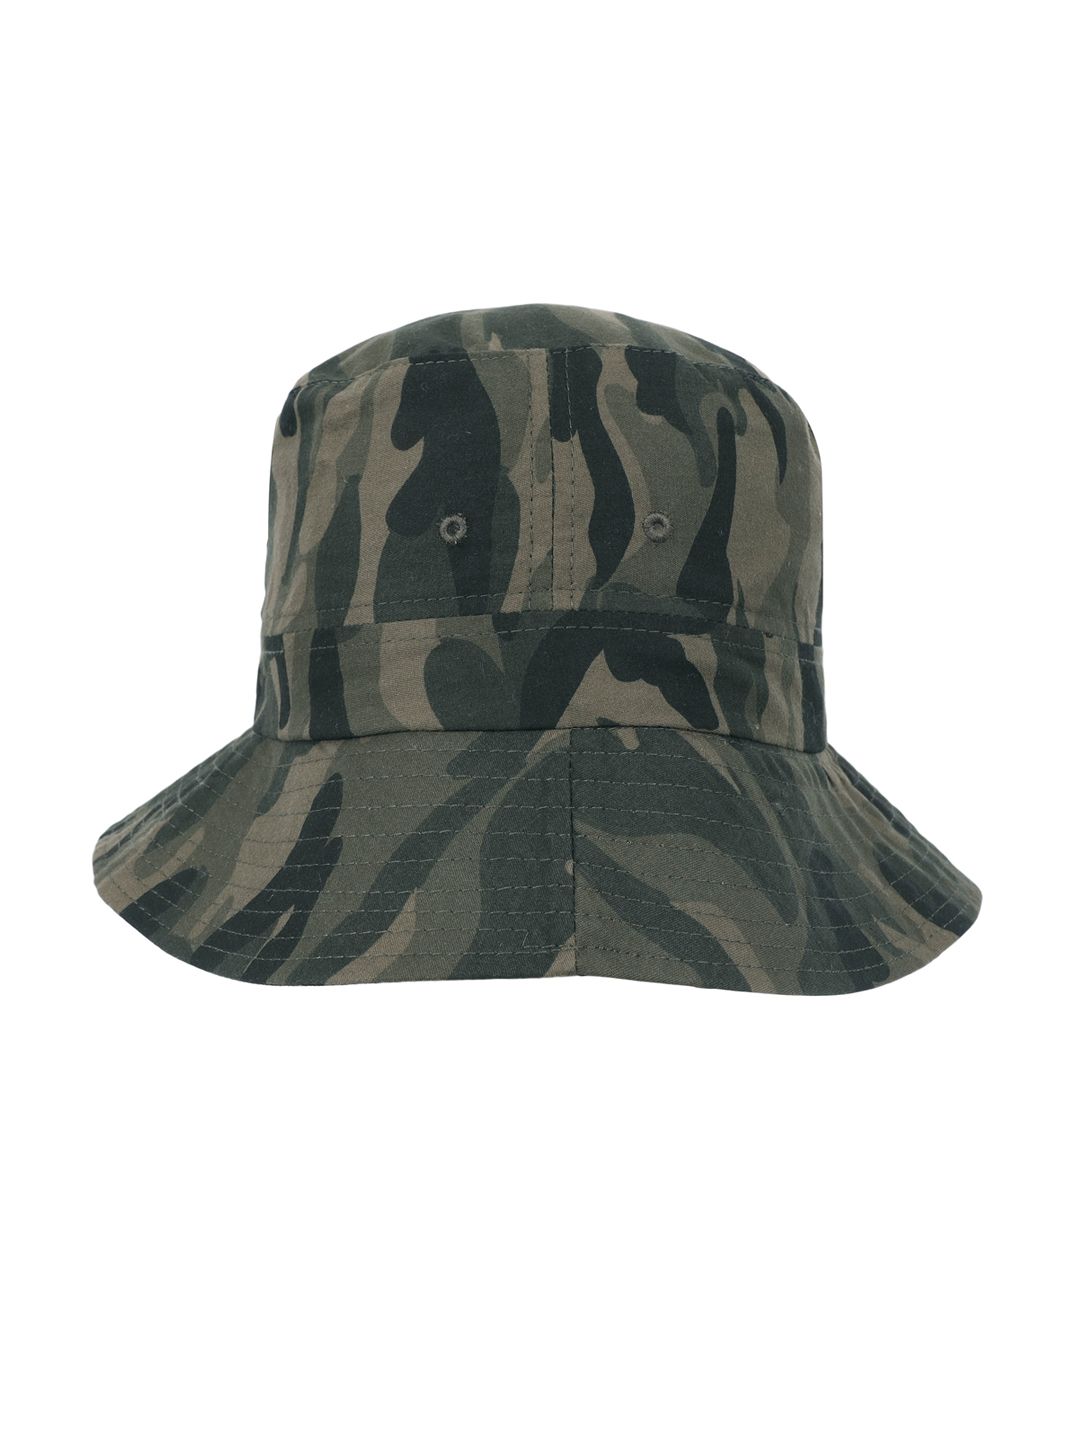 FabSeasons Unisex Green Camouflage Printed Cotton Bucket Hat Price in India